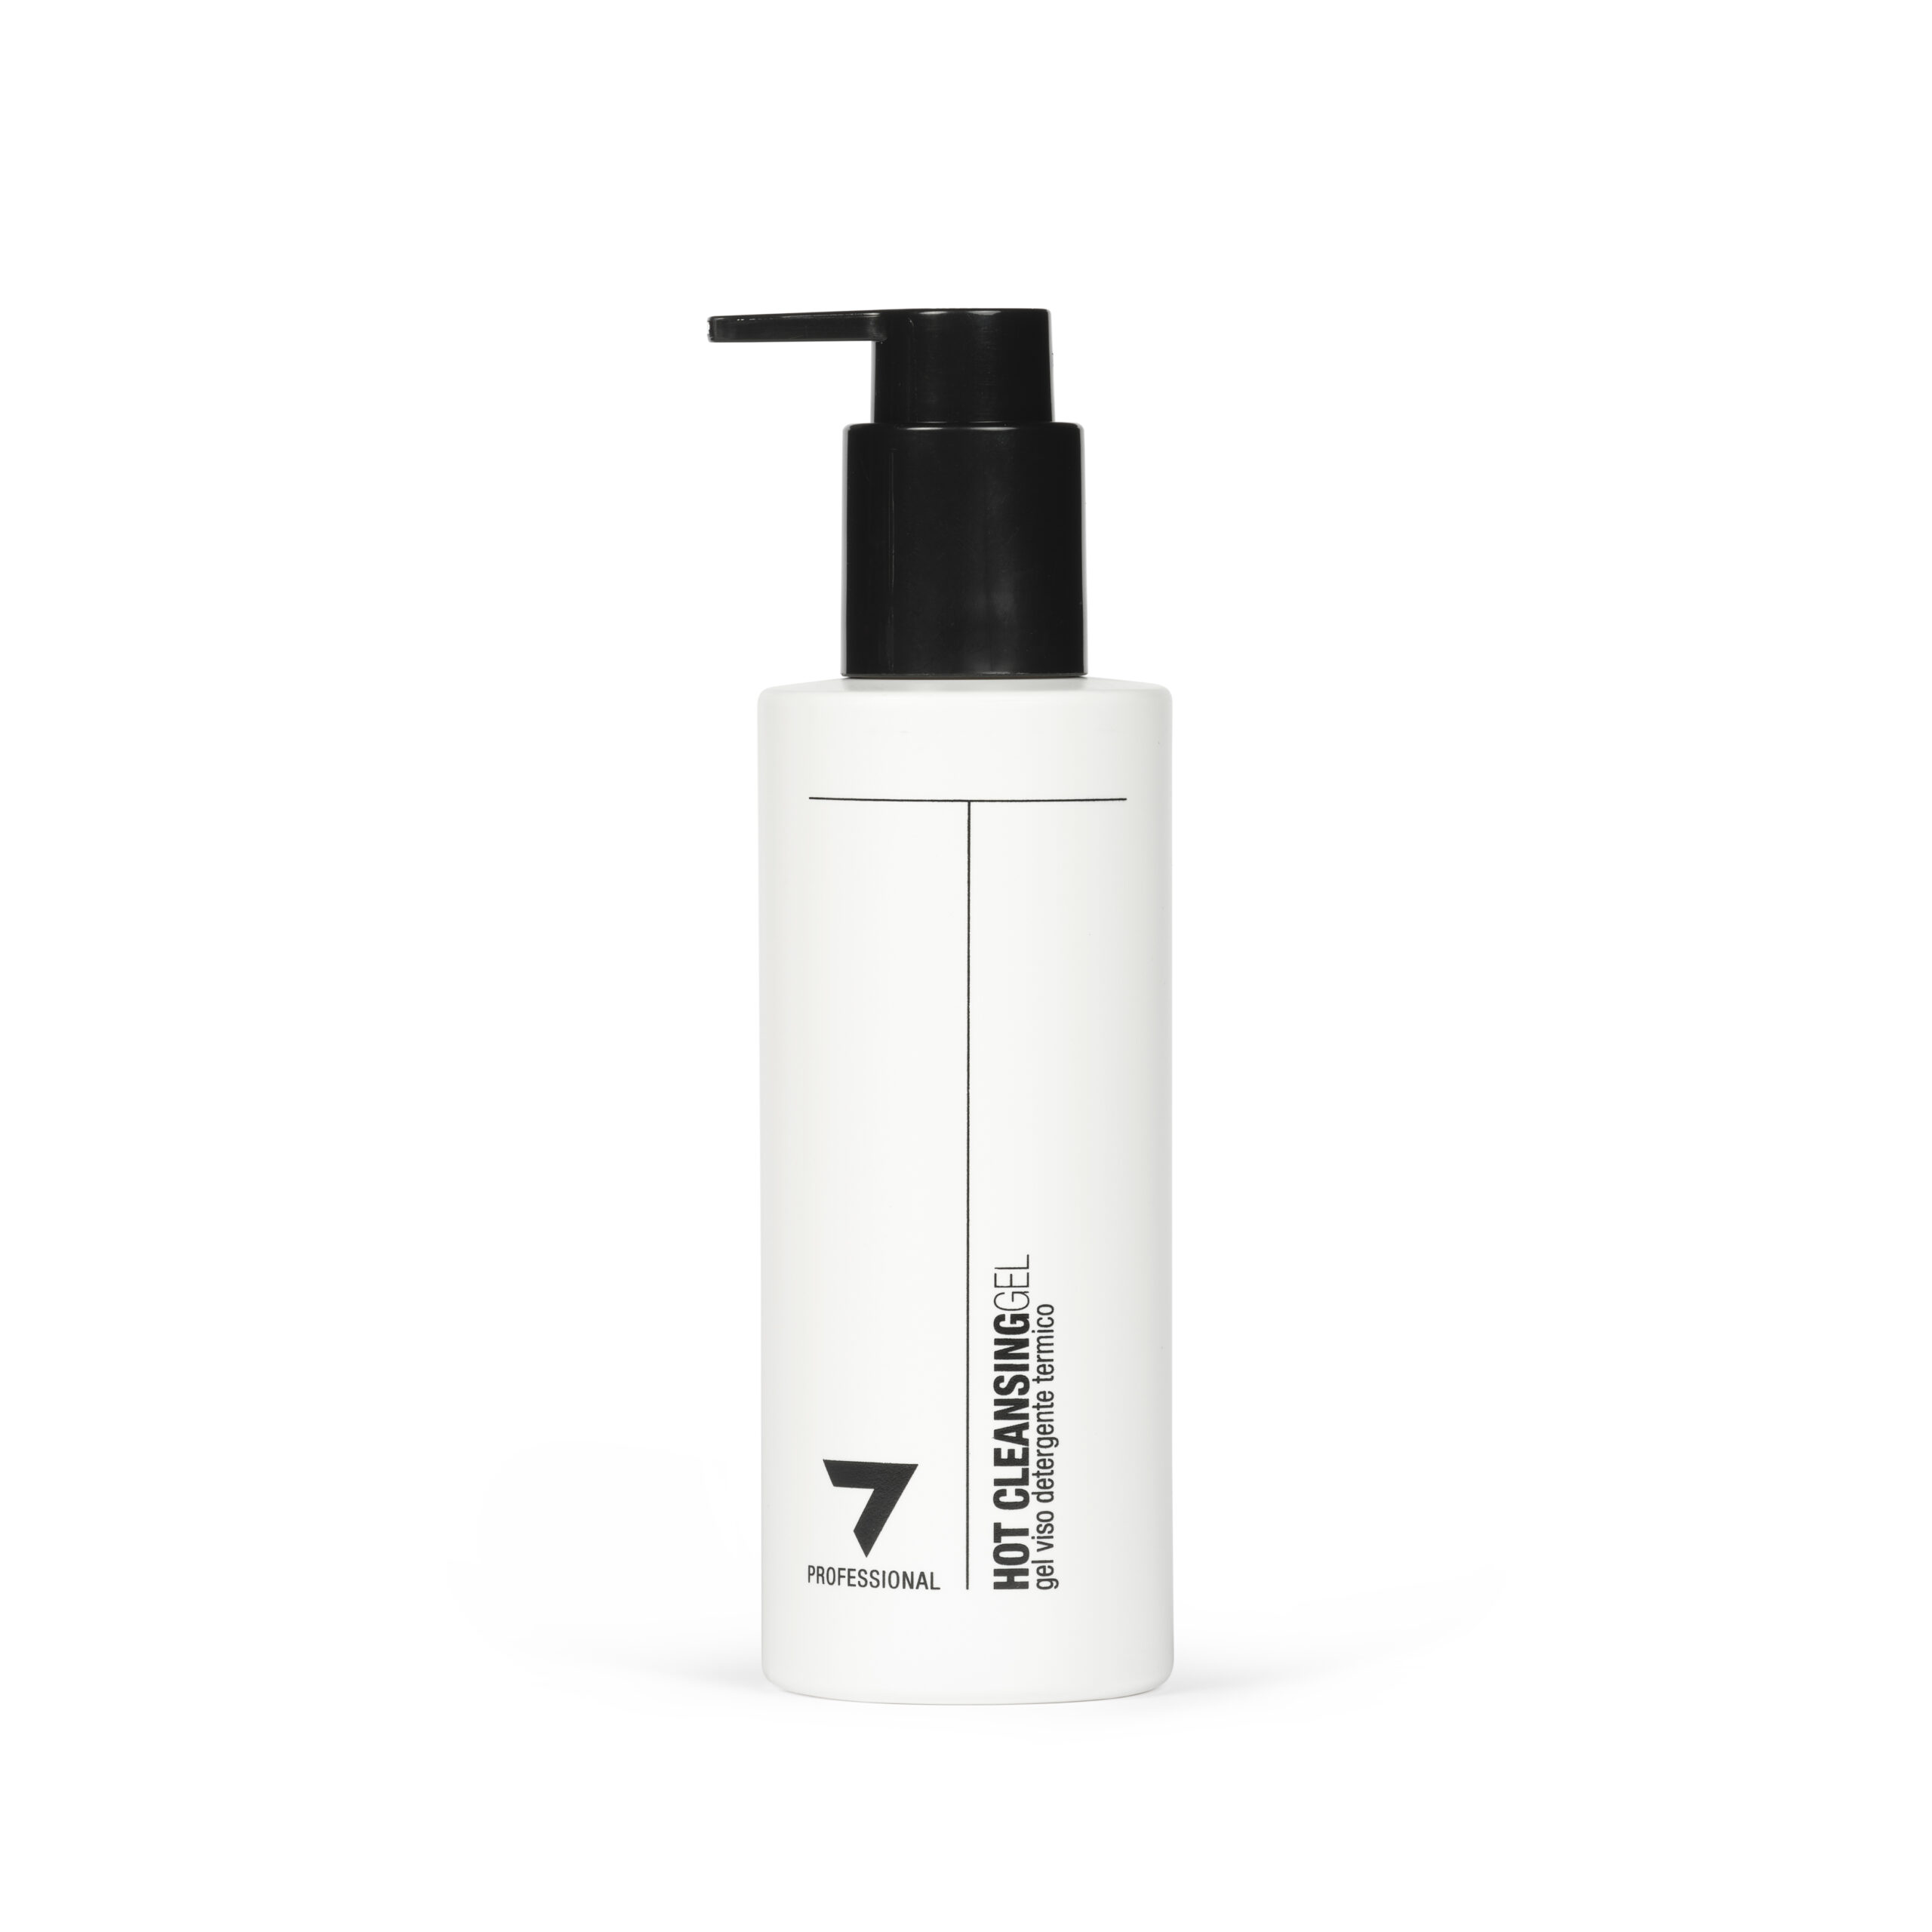 HOT CLEANSING GEL -for professional use only